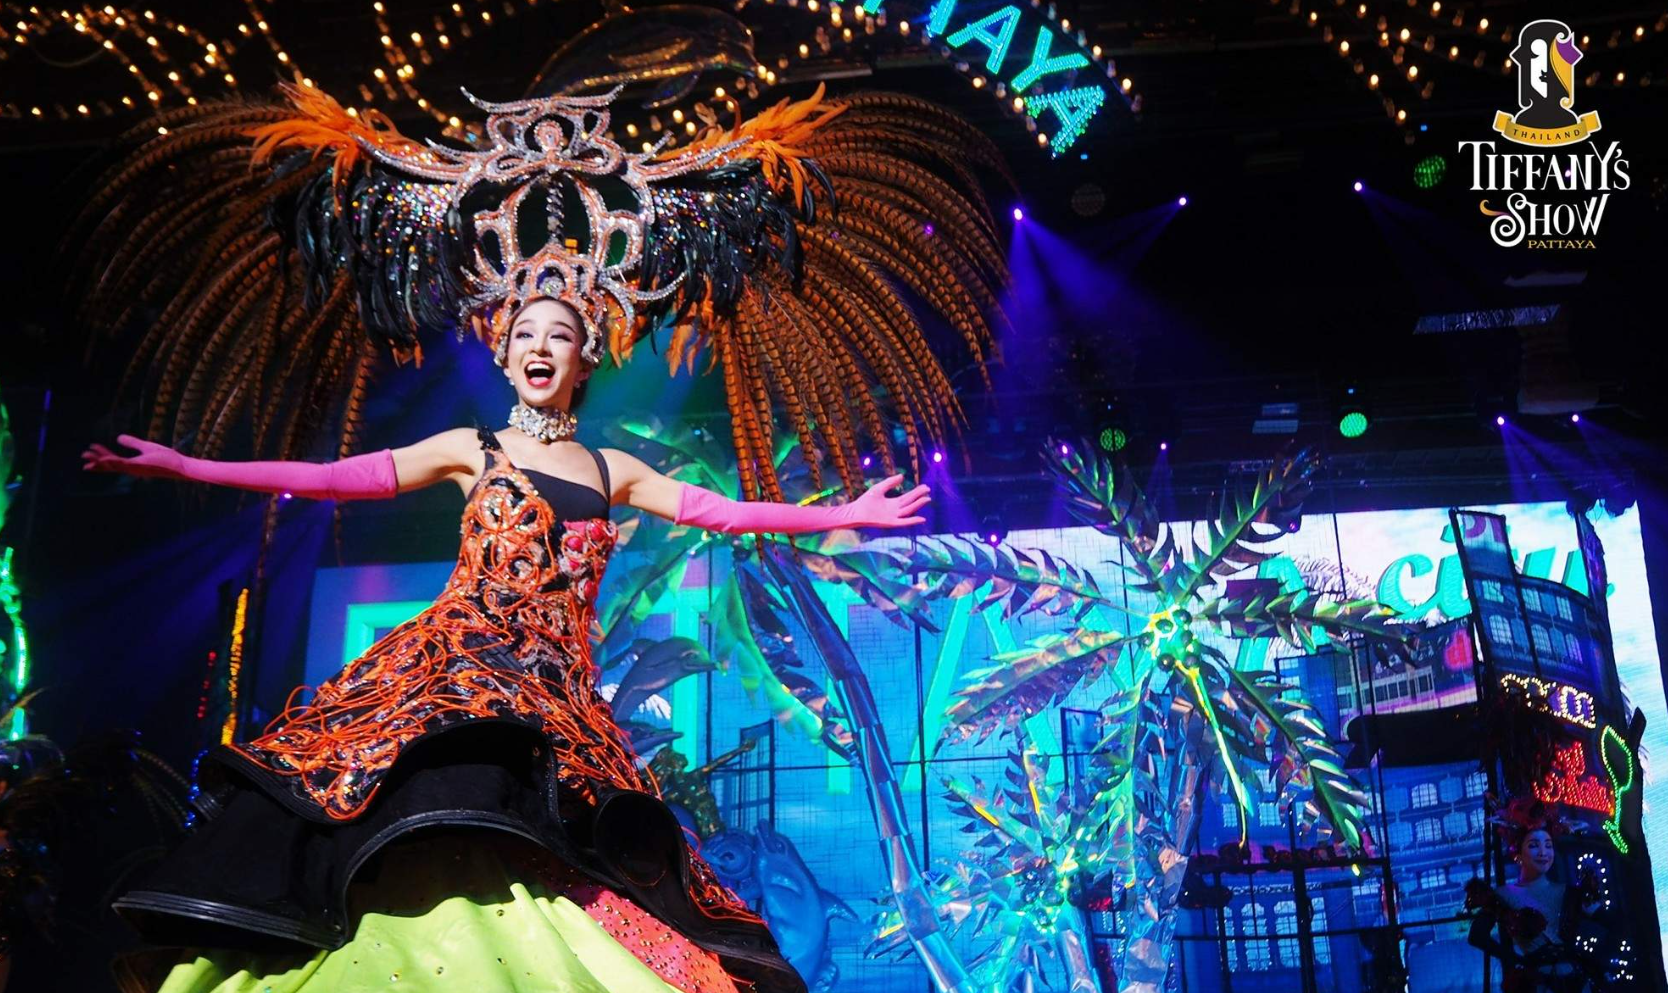 Unique things to do in Thailand Be captivated by the dazzling performances at the Tiffany Cabaret Ladyboy Show in Pattaya.